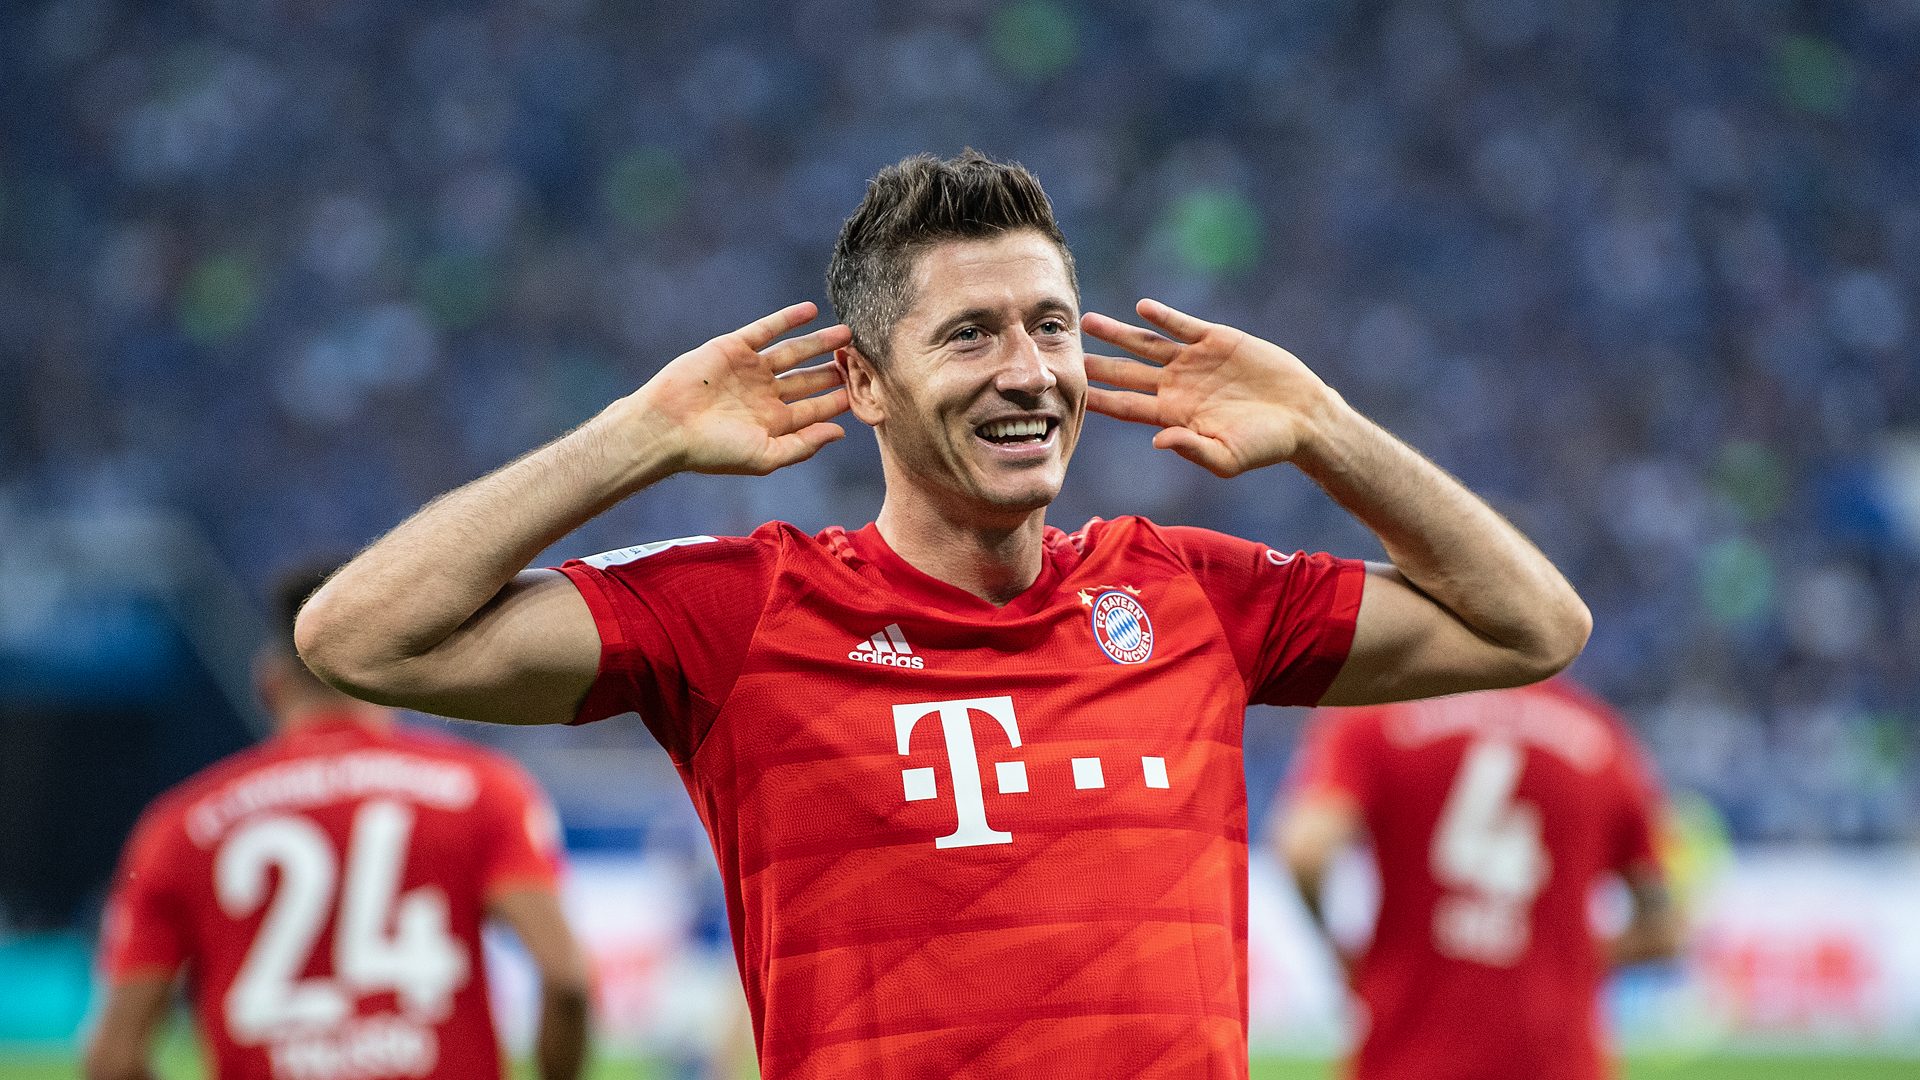 The Throwback, Robert Lewandowski – From The Pages of Podcast